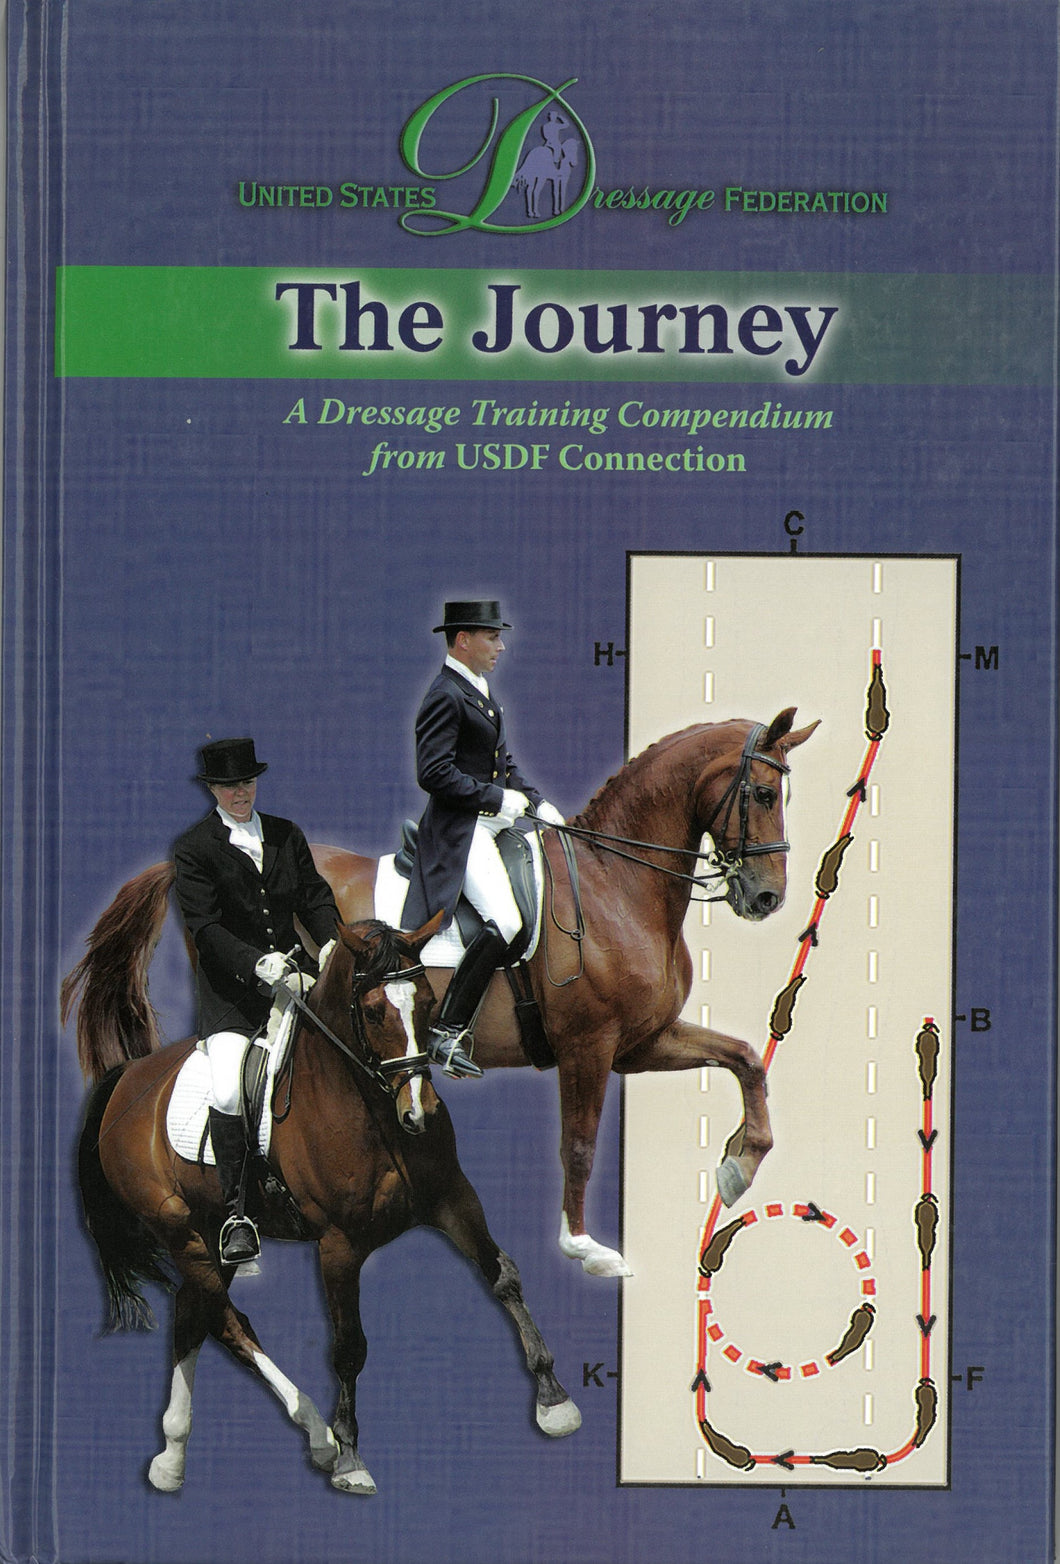 The Journey - A Dressage Training Compendium from USDF Connection